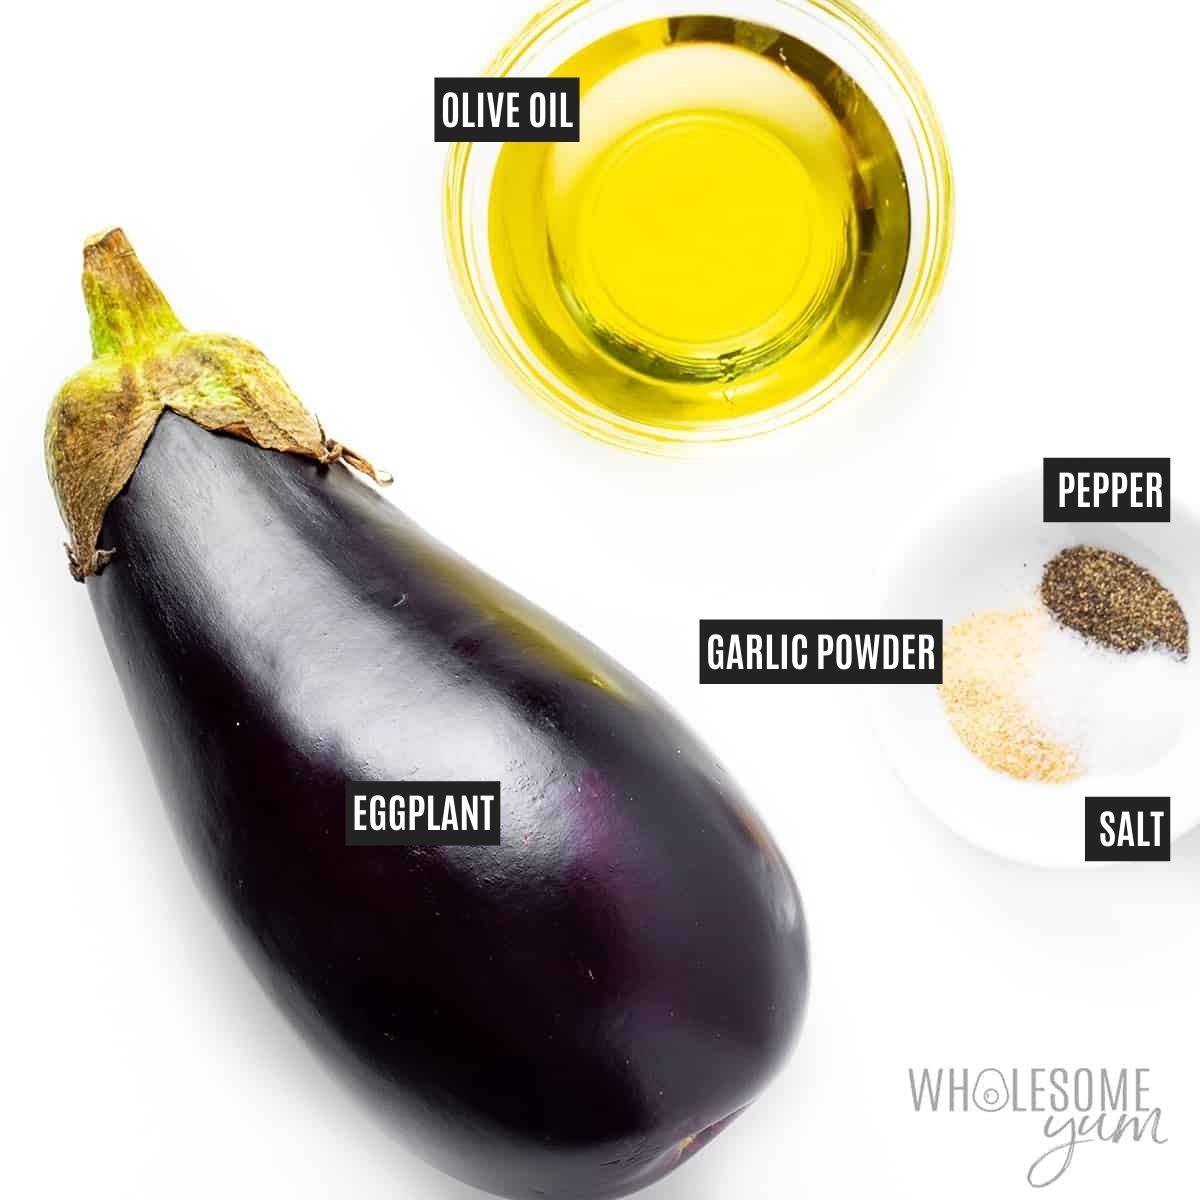 A whole globe eggplant next to labeled bowls of oil and spices.